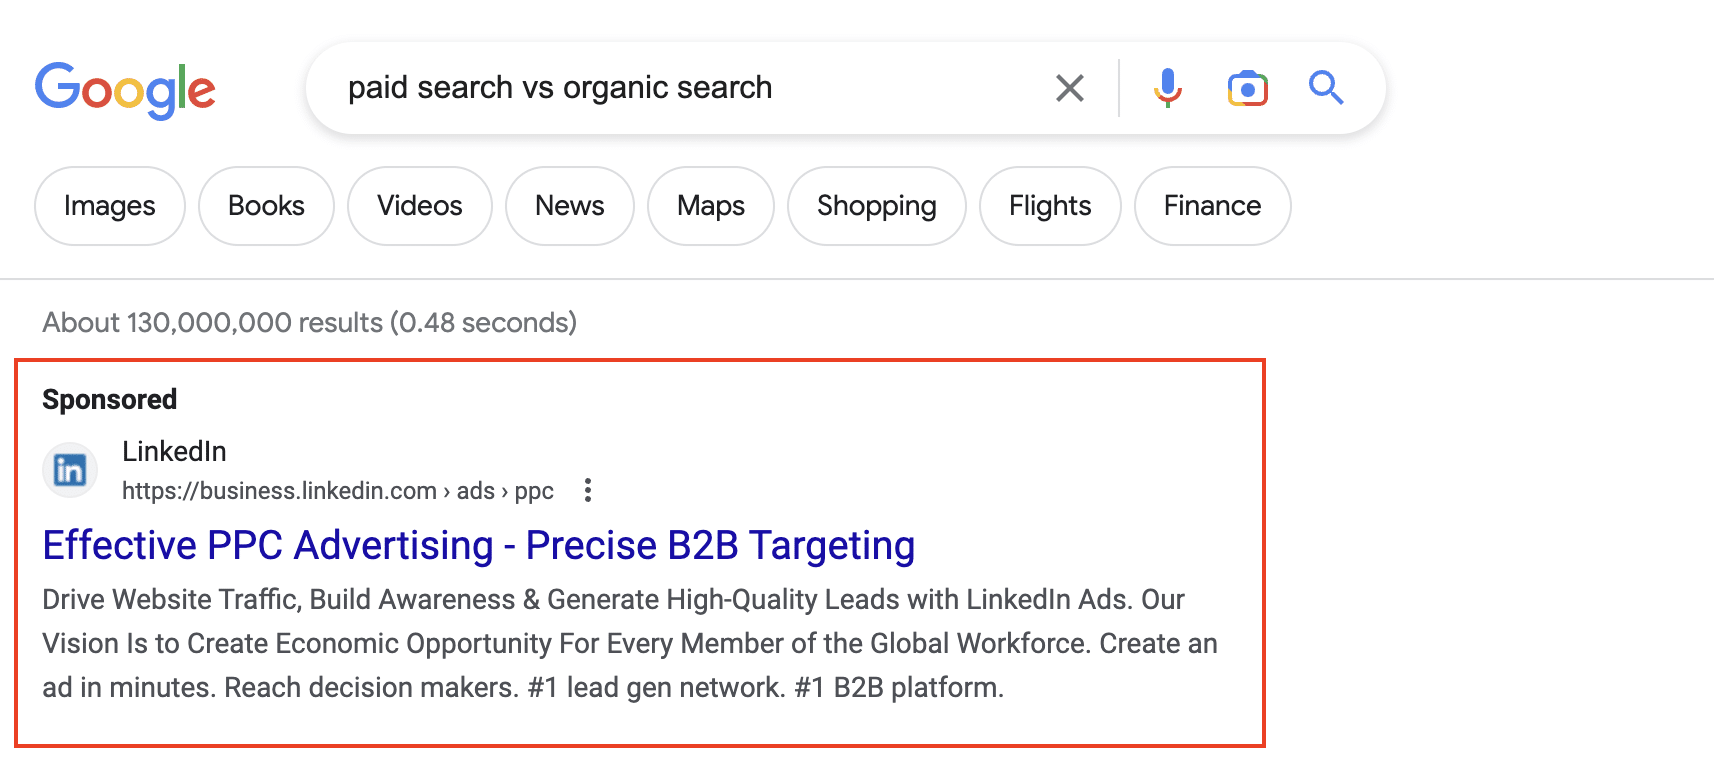 example of paid search marketing on Google